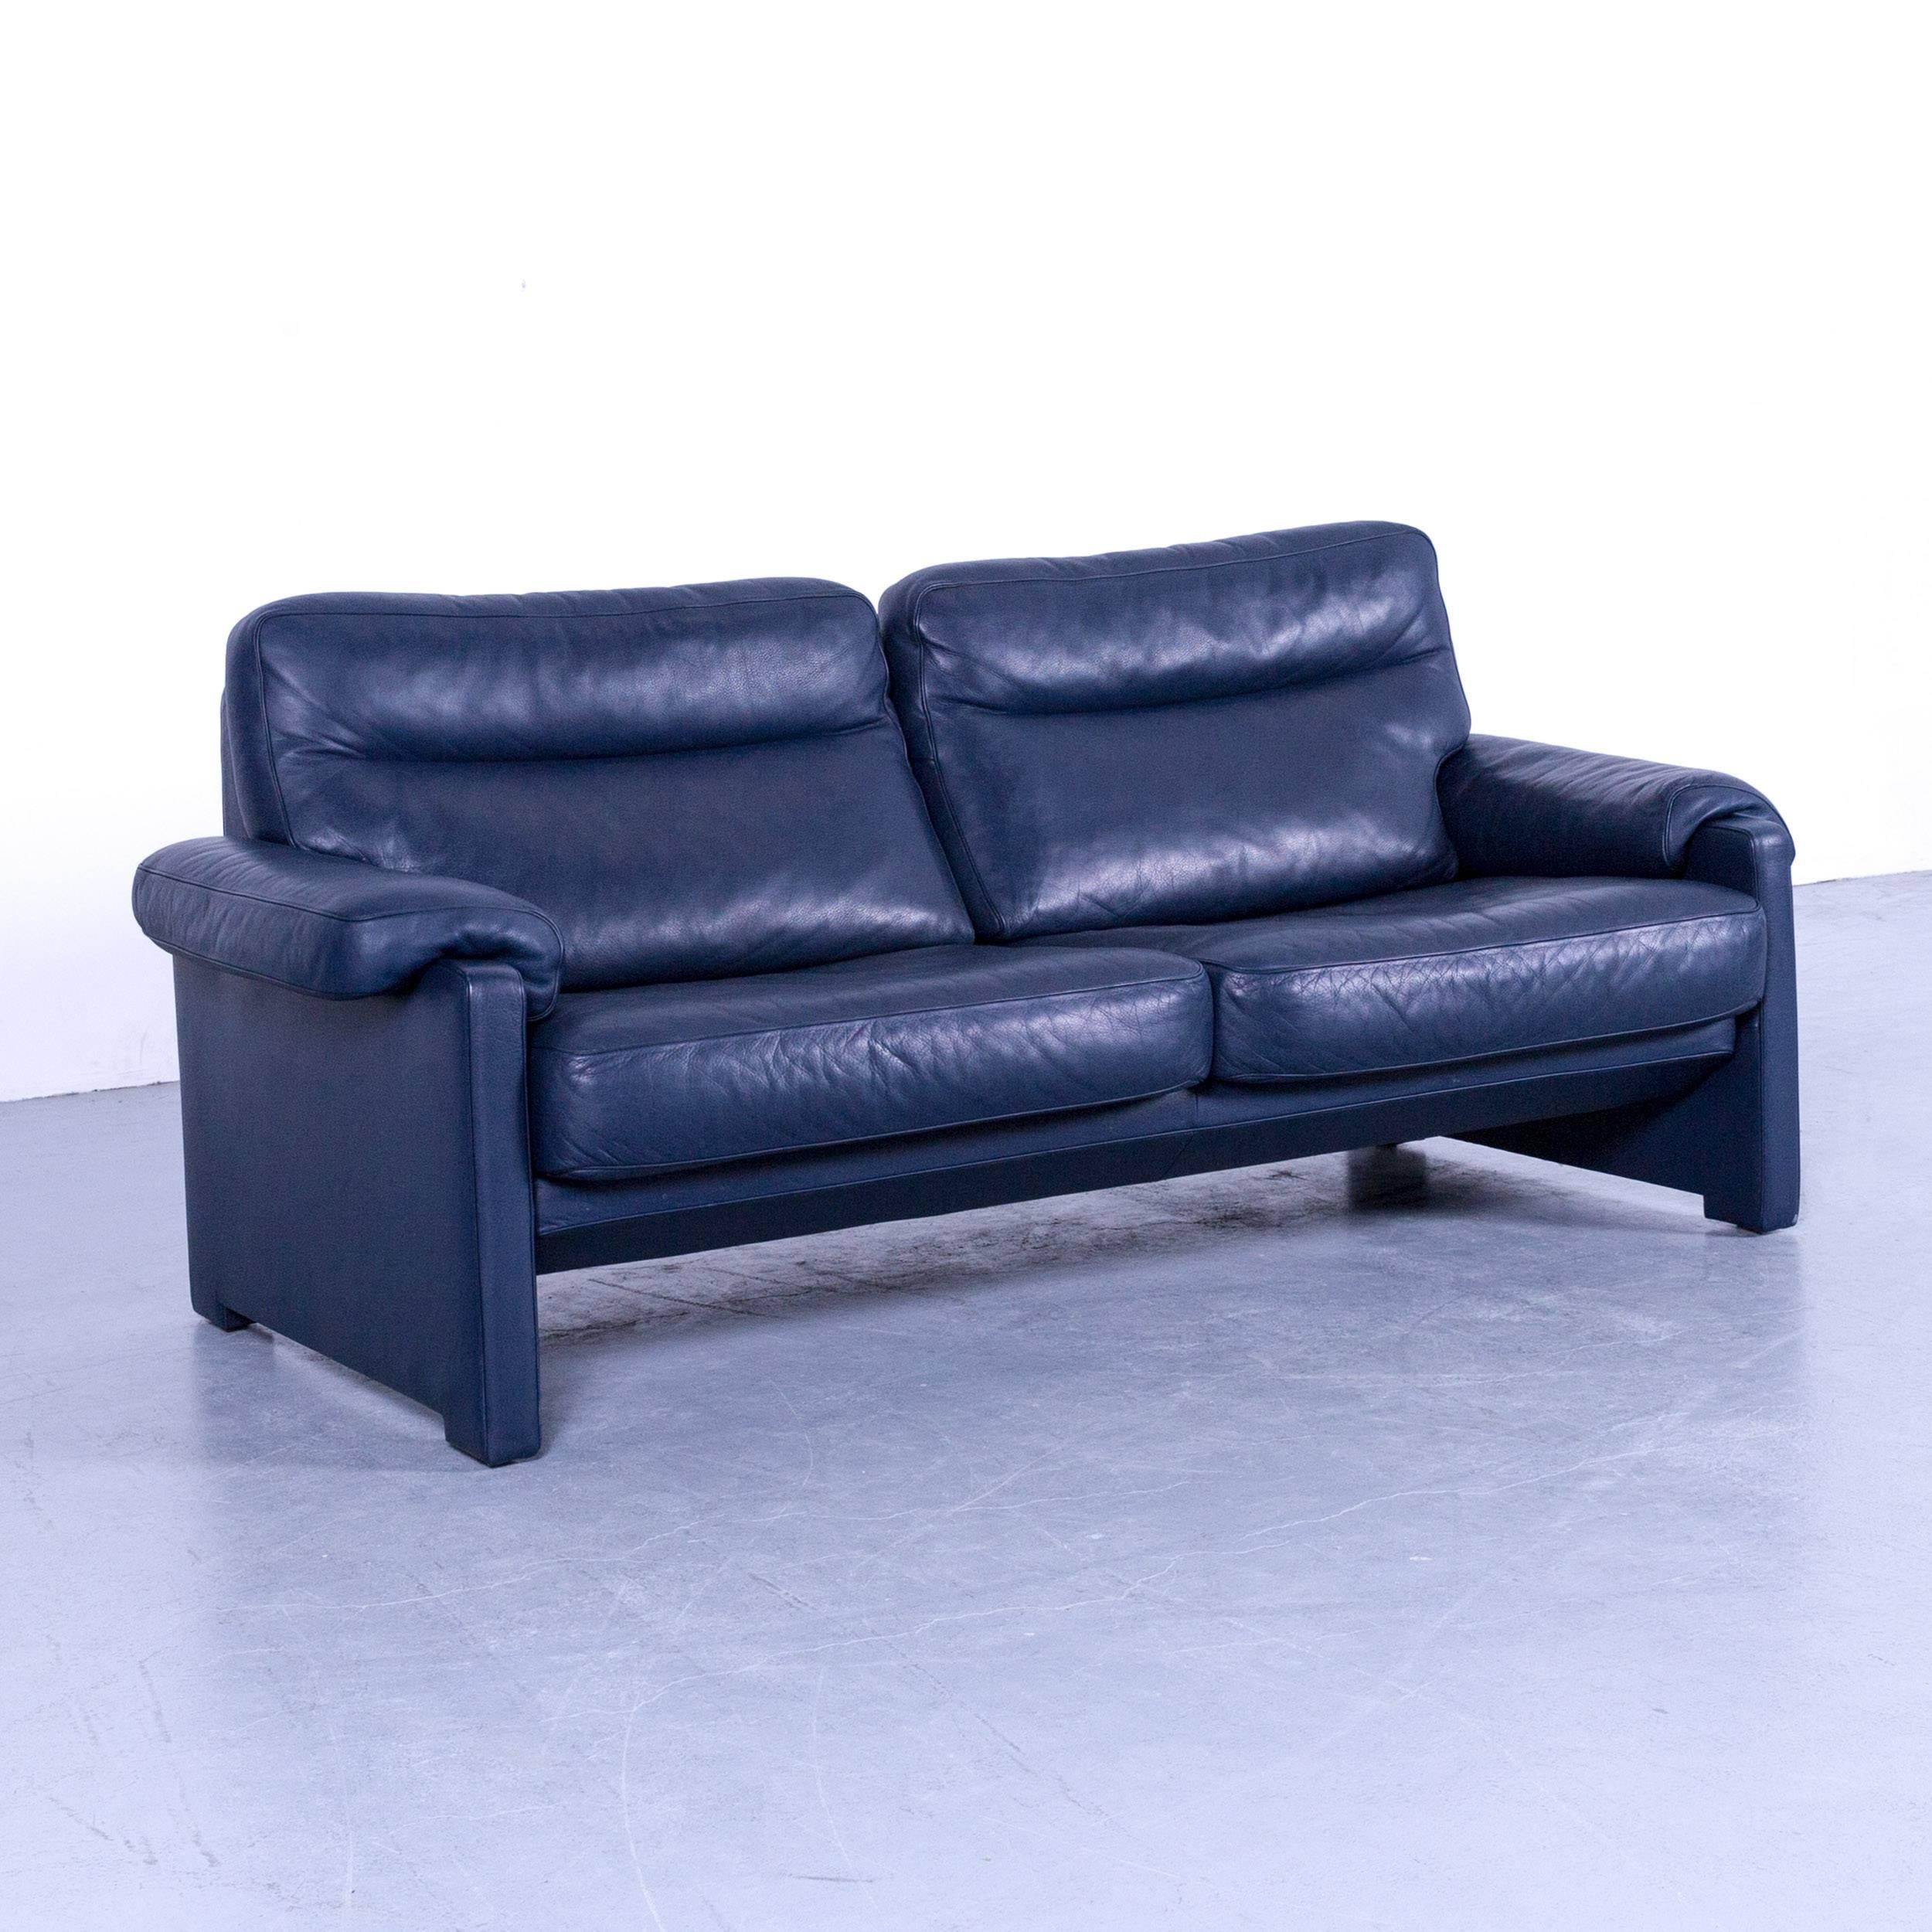 De Sede DS 70 designer sofa navy blue leather two-seat couch Switzerland, made for pure comfort.